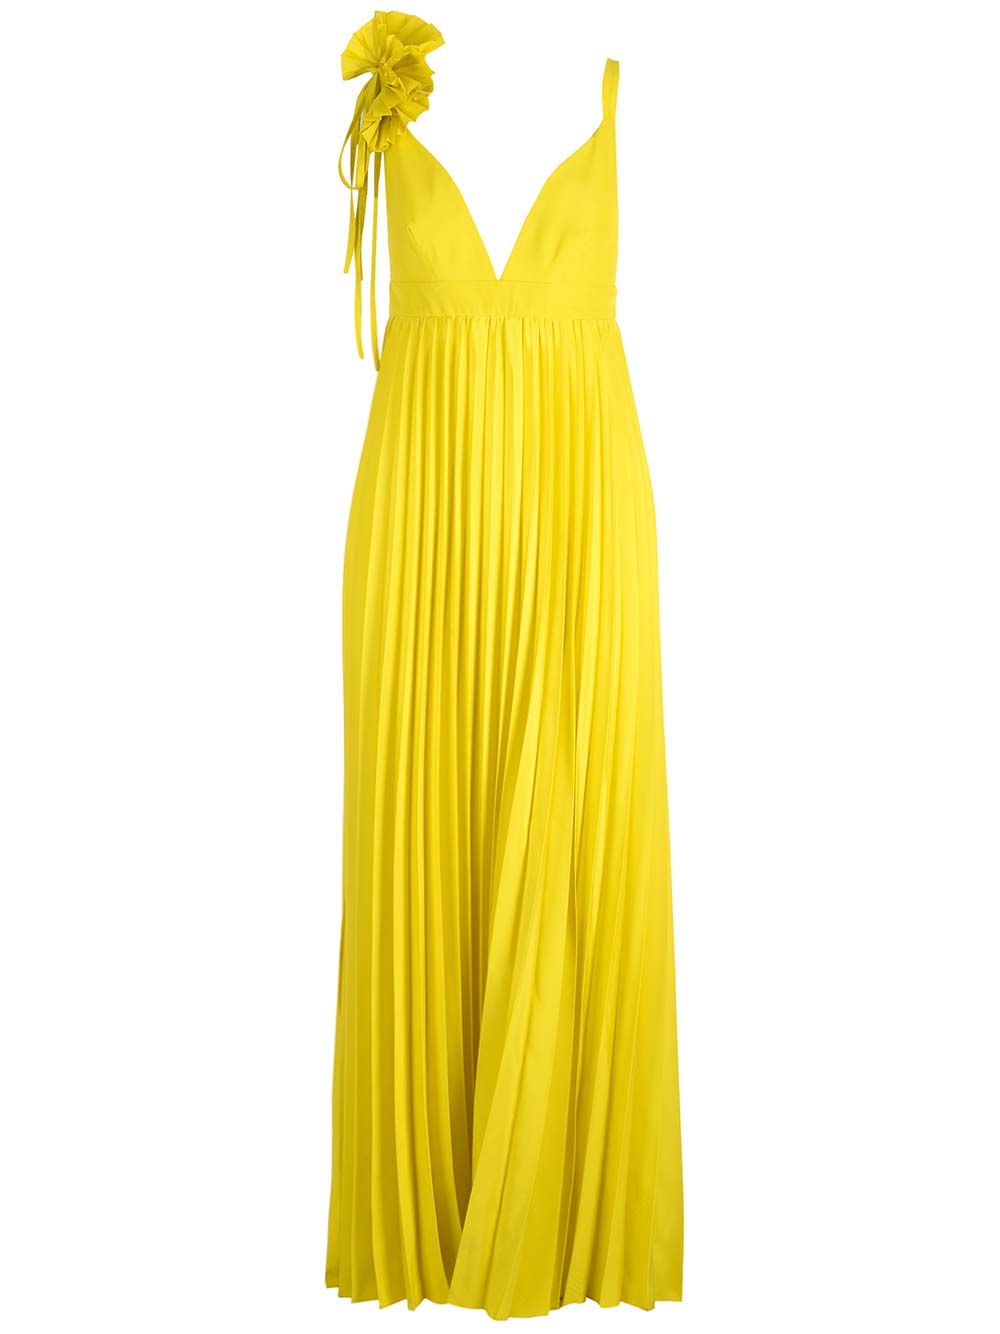 P.A.R.O.S.H LONG PLEATED DRESS WITH RUFFLES